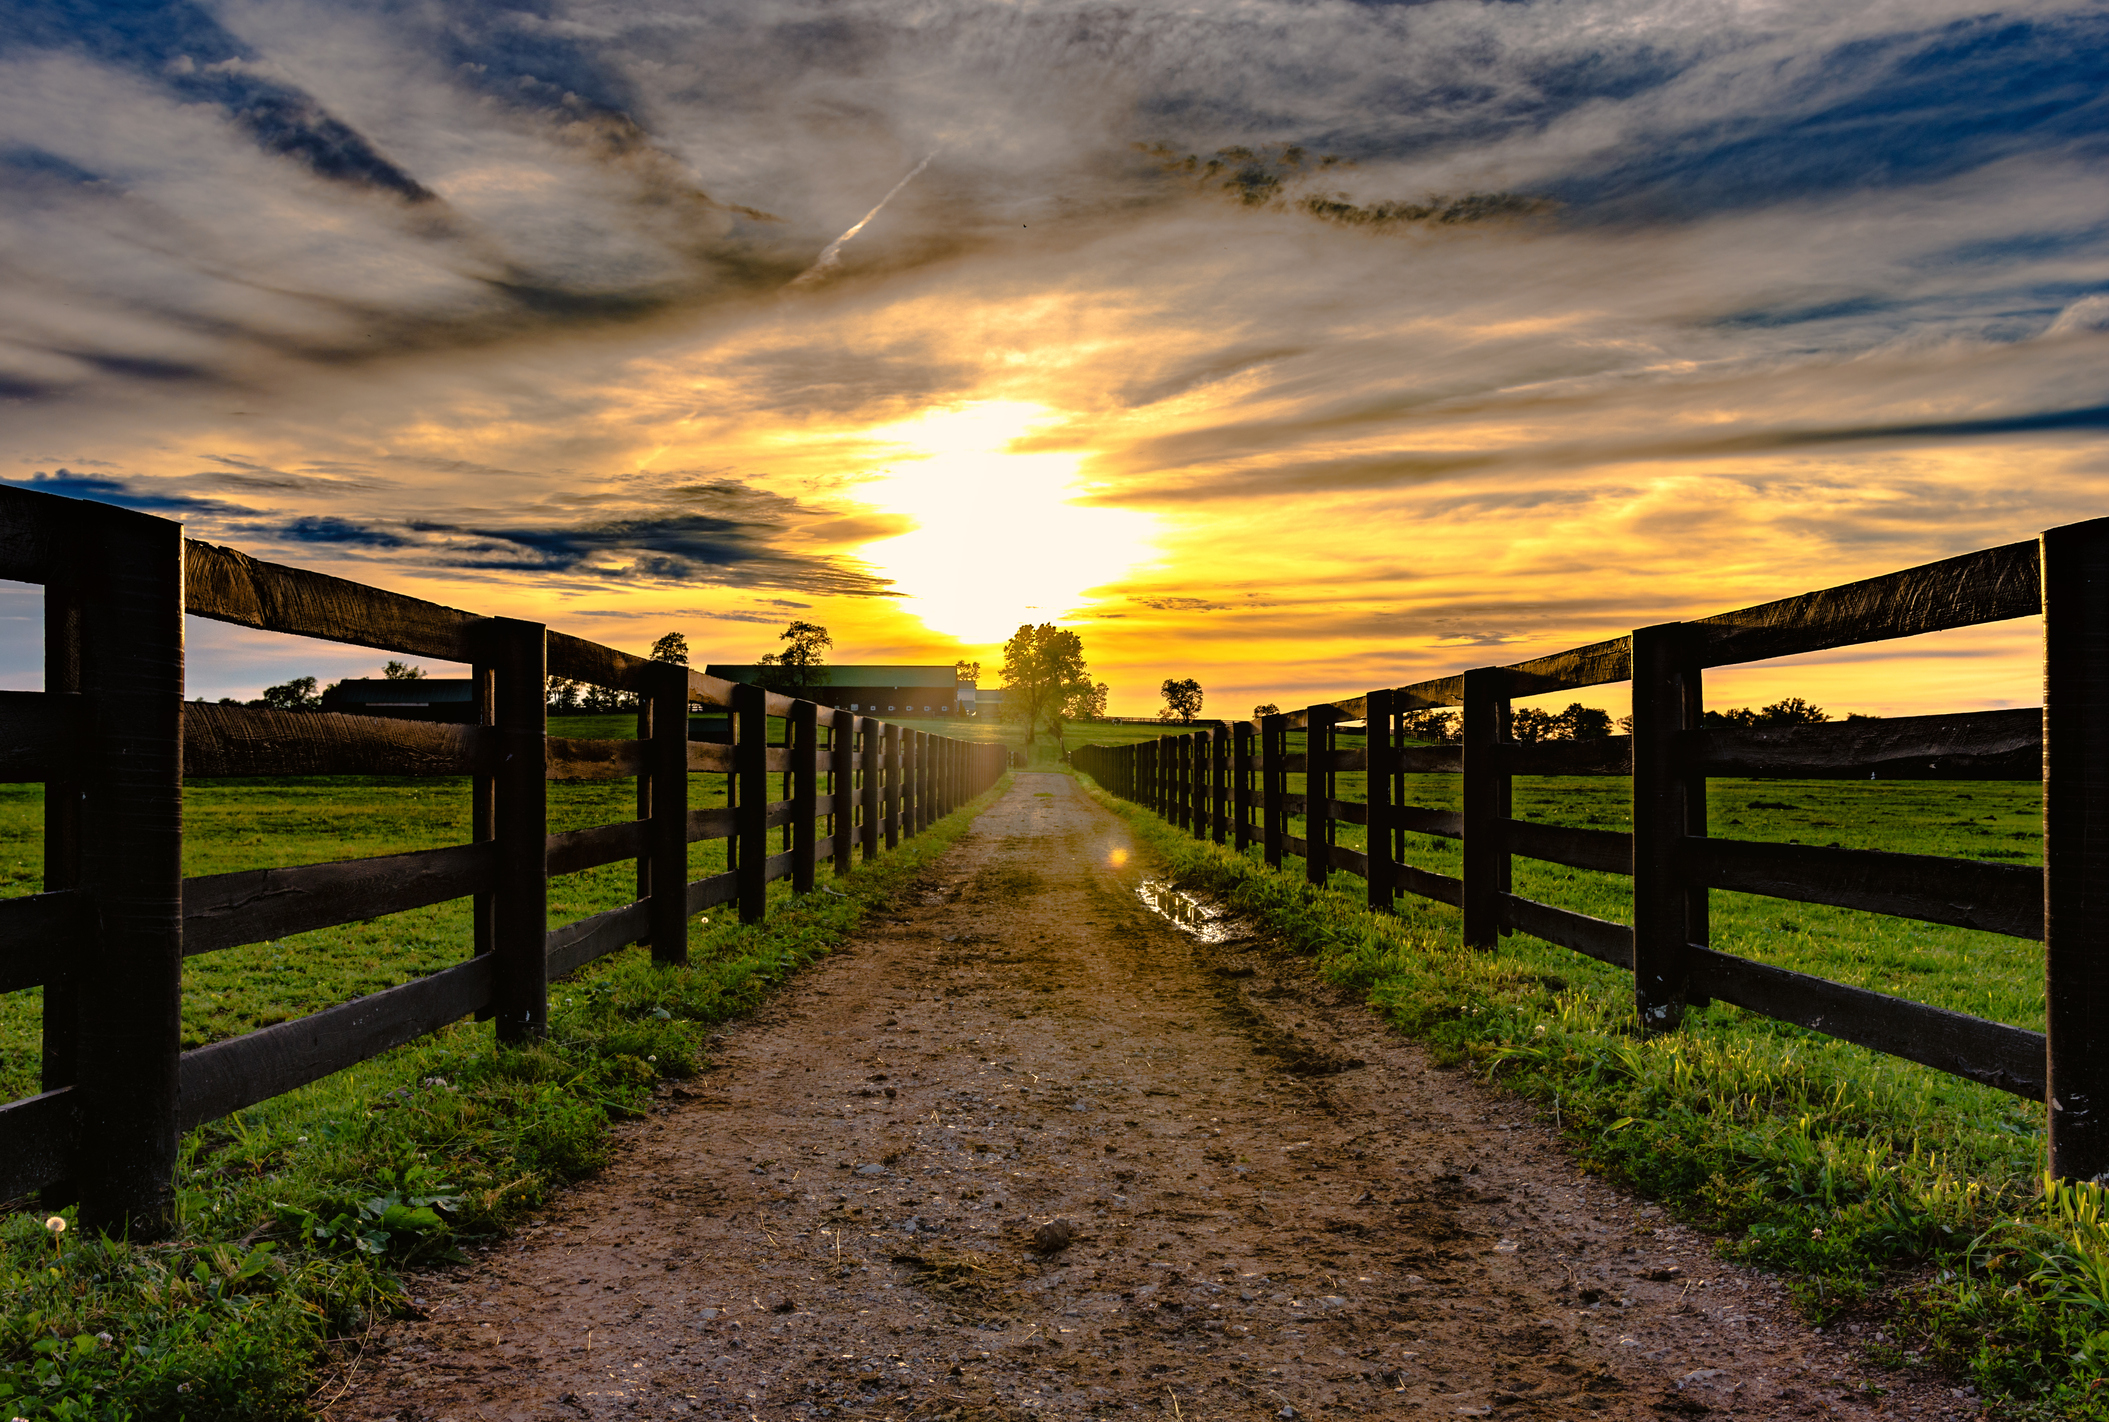 Dirt road leading to a barn in the distance with wooden rail fences on either side with a sunset in the background